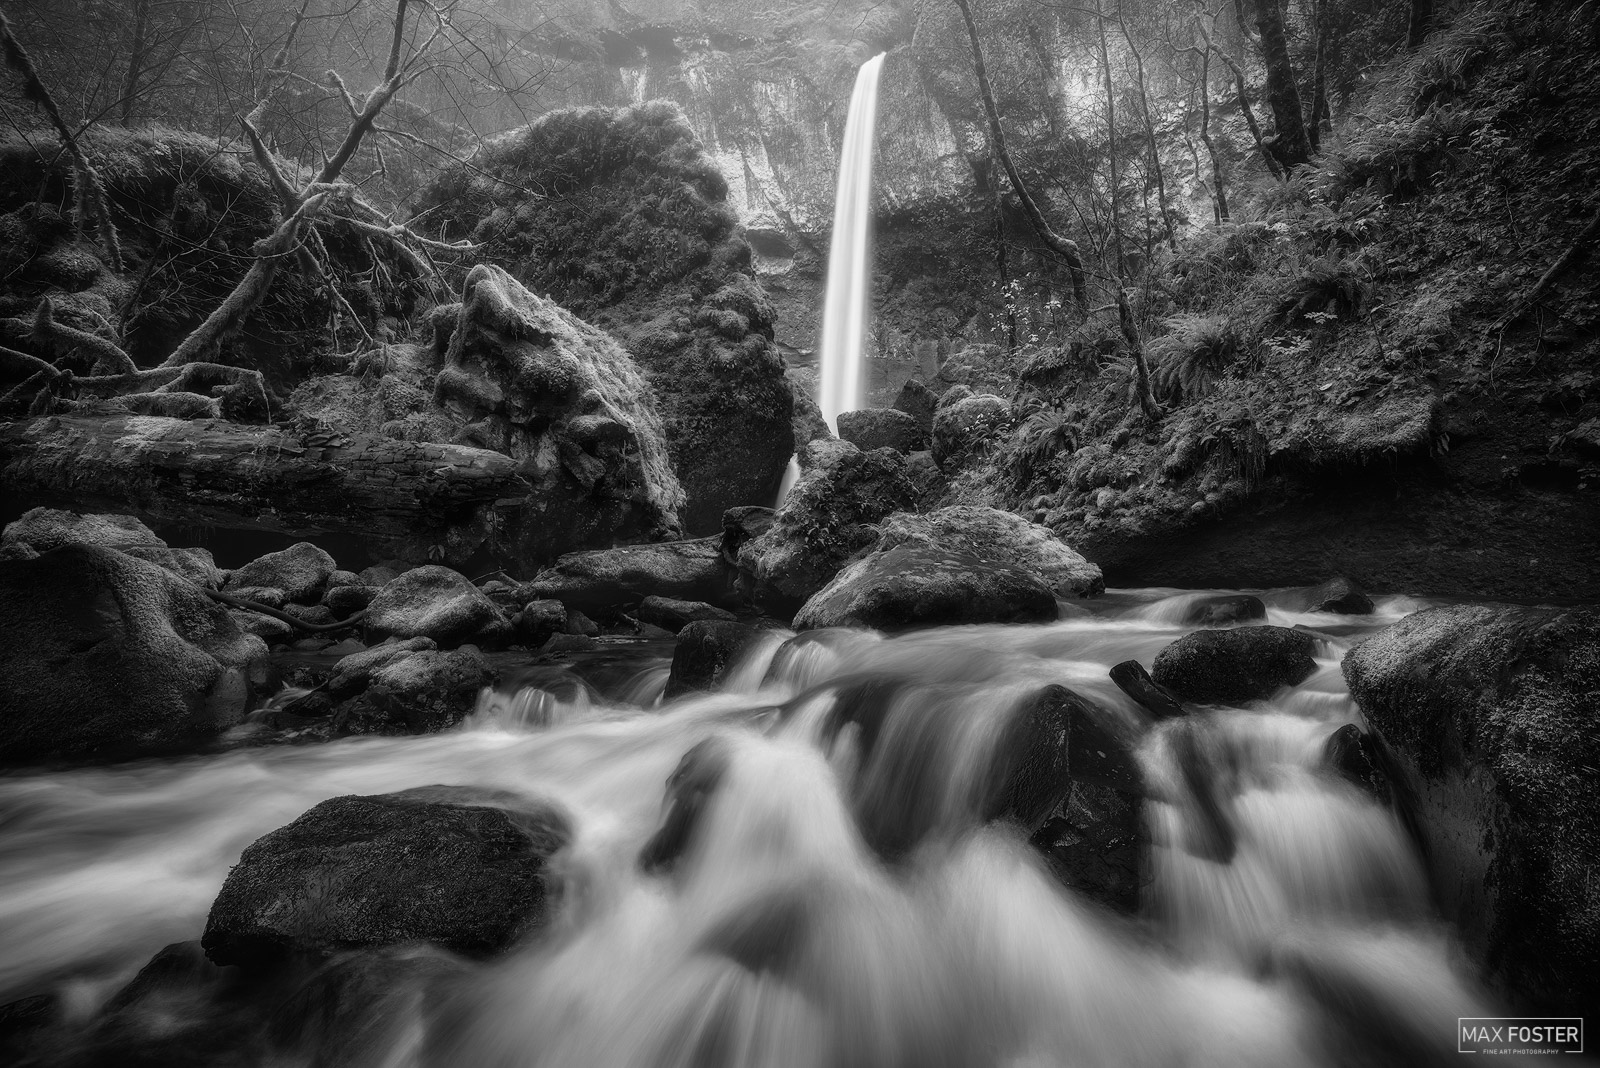 Breathe new life into your home with Boulder Alley Monochrome, Max Foster's limited edition photography print of Elowah Falls...